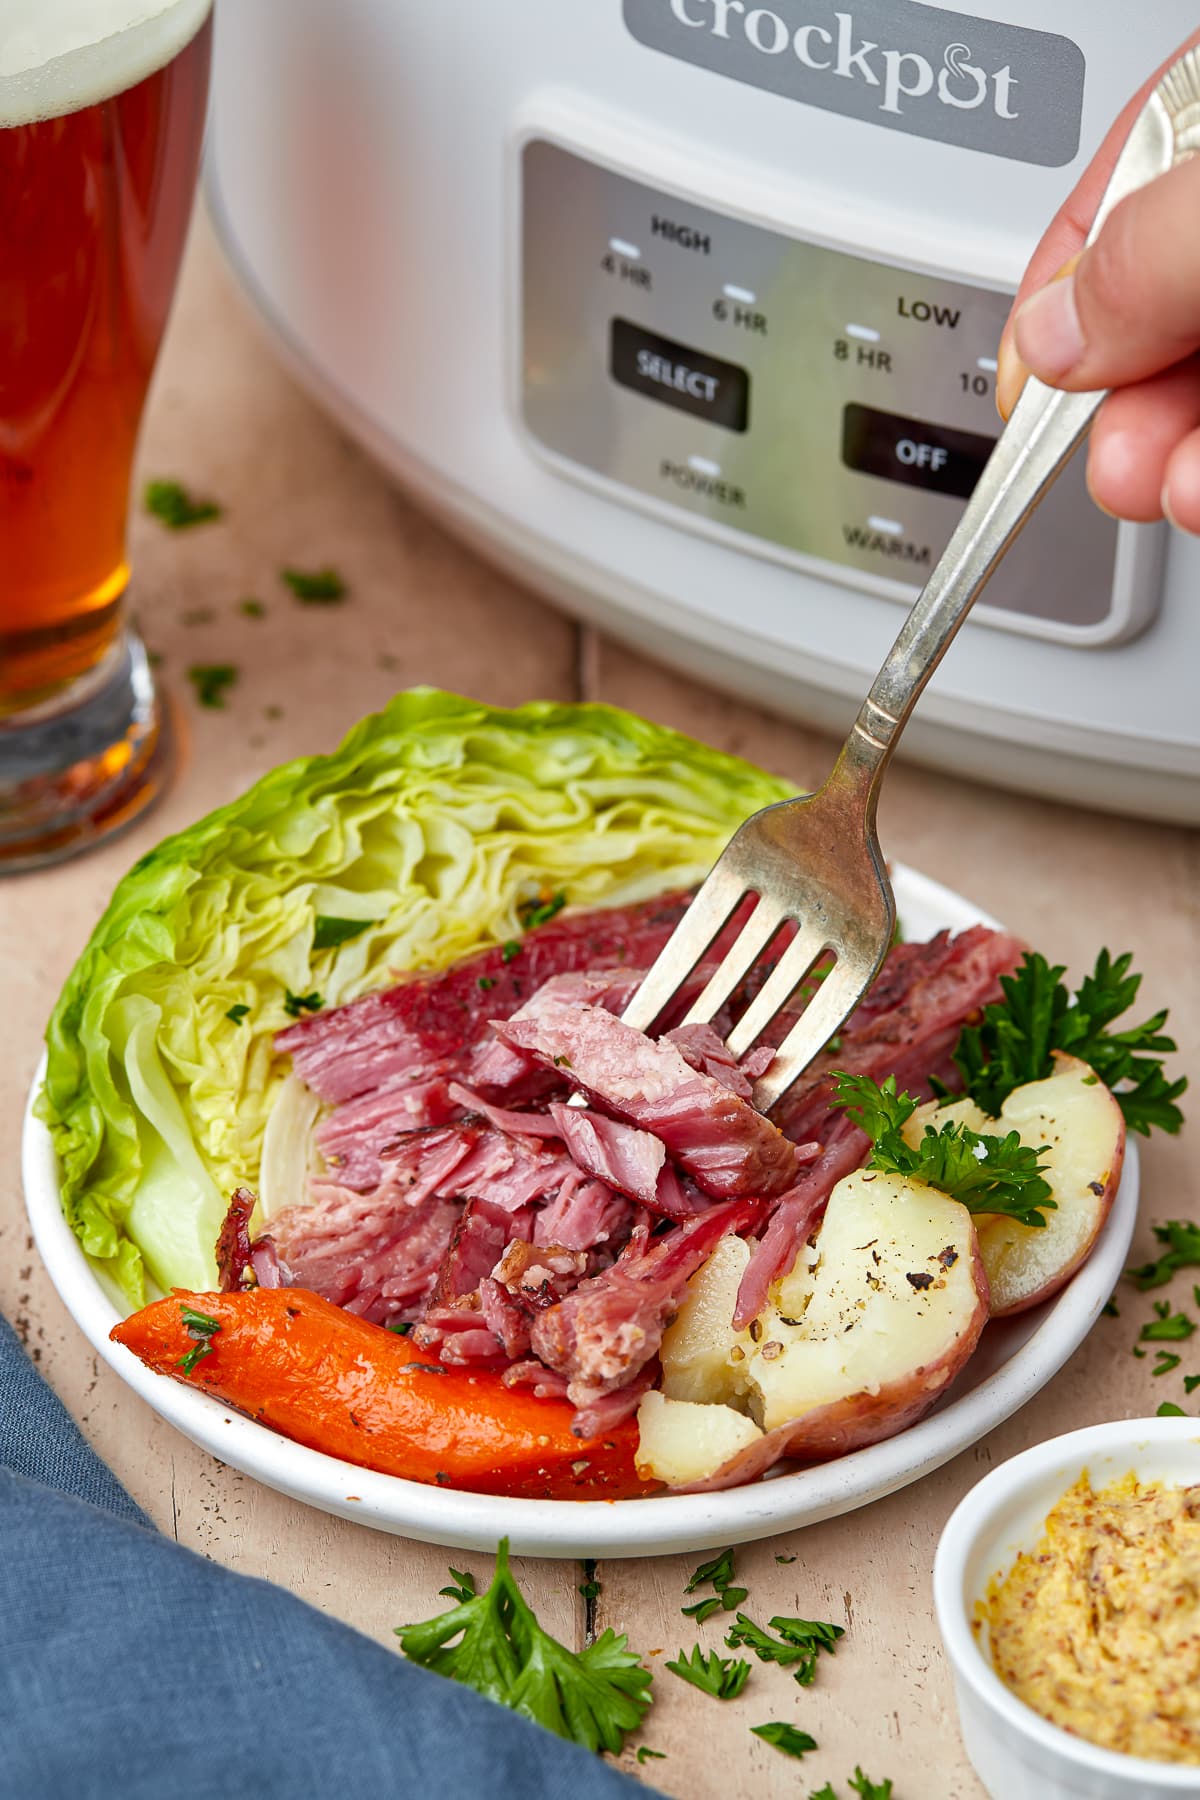 Plated shot of slow cooker corned beef and cabbage on a white plate with white slow cooker in the background, glass of beer, on a wooden backdrop